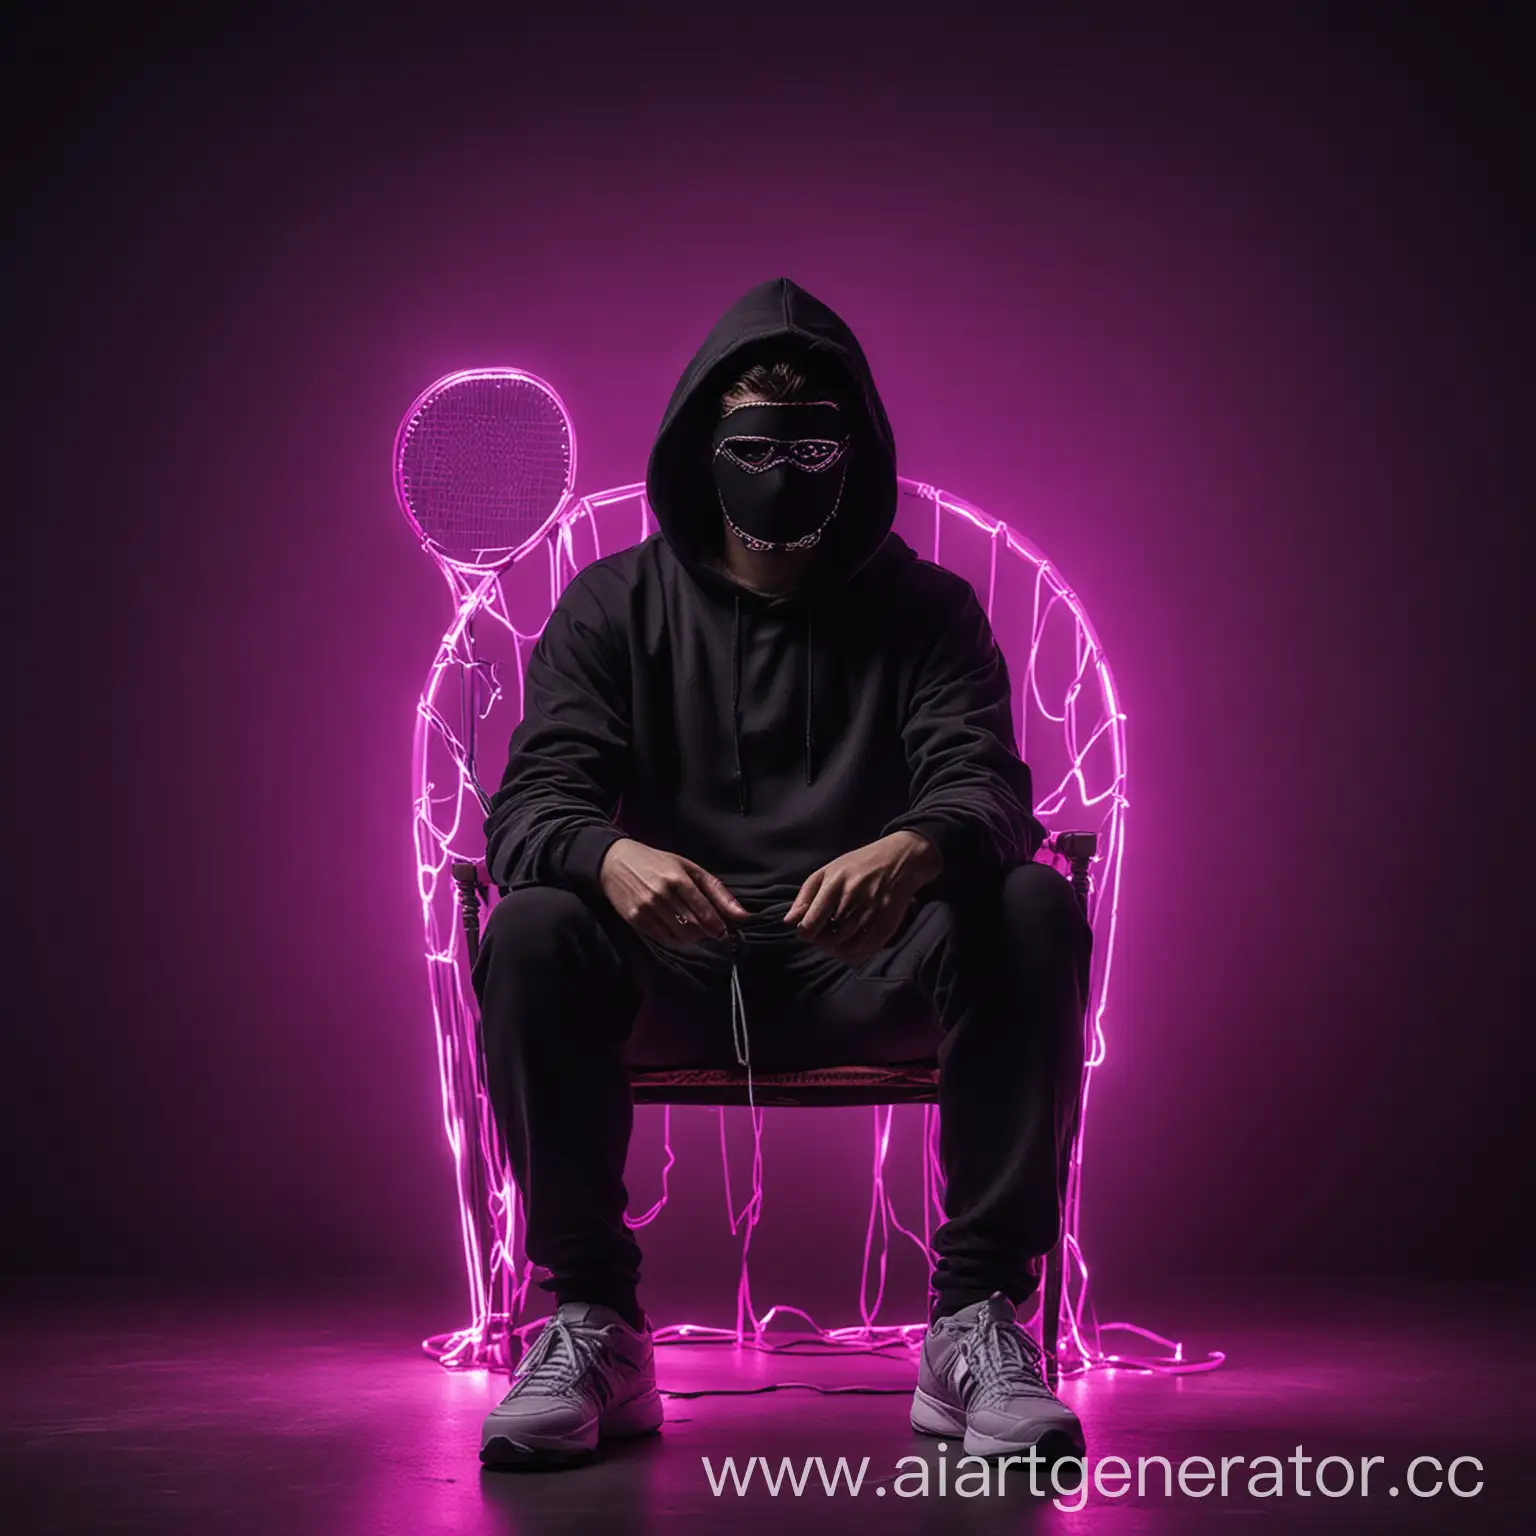 A man sitting in an expensive armchair in a black hoodie in a capechon has darkness instead of a face. On the background is a racket with ribbons in purple neon color